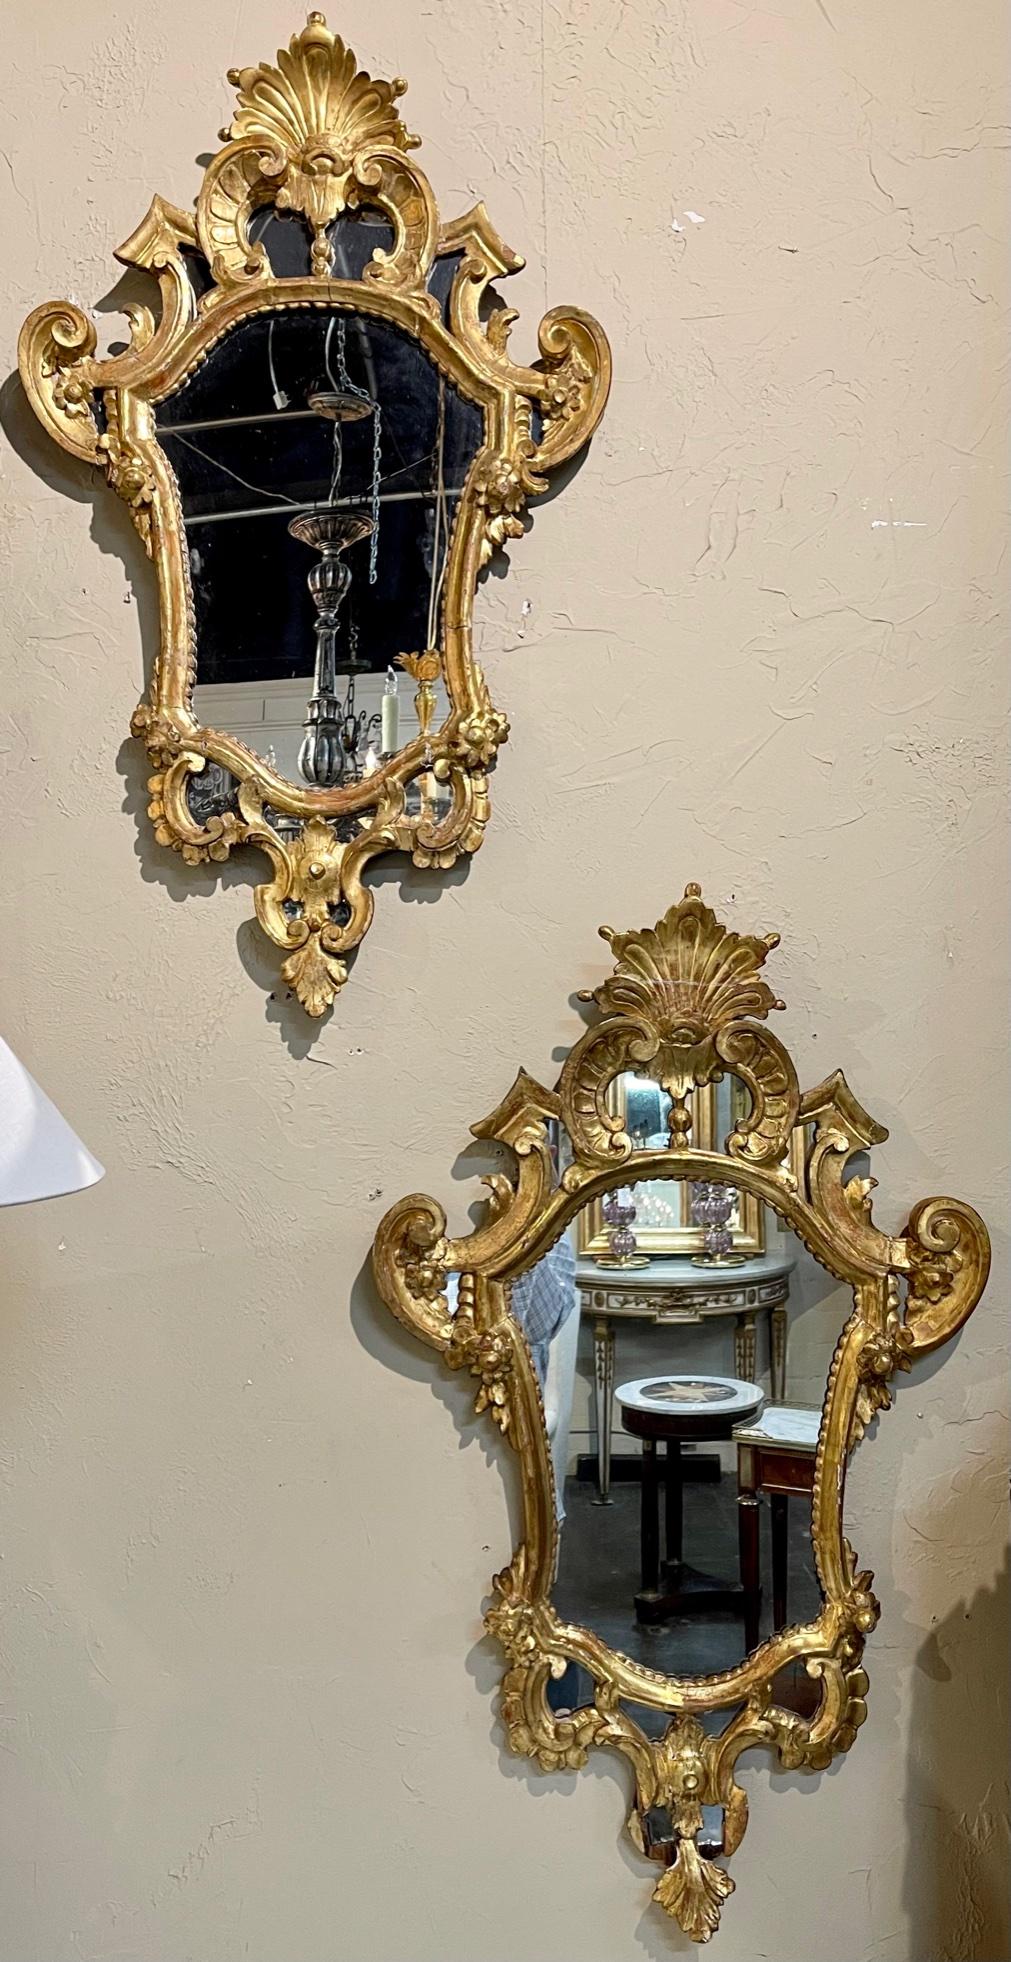 Pair of early 19th century Italian carved and giltwood mirrors. Circa 1840. Adds warmth and charm to any room!
Note: Sold as a pair.